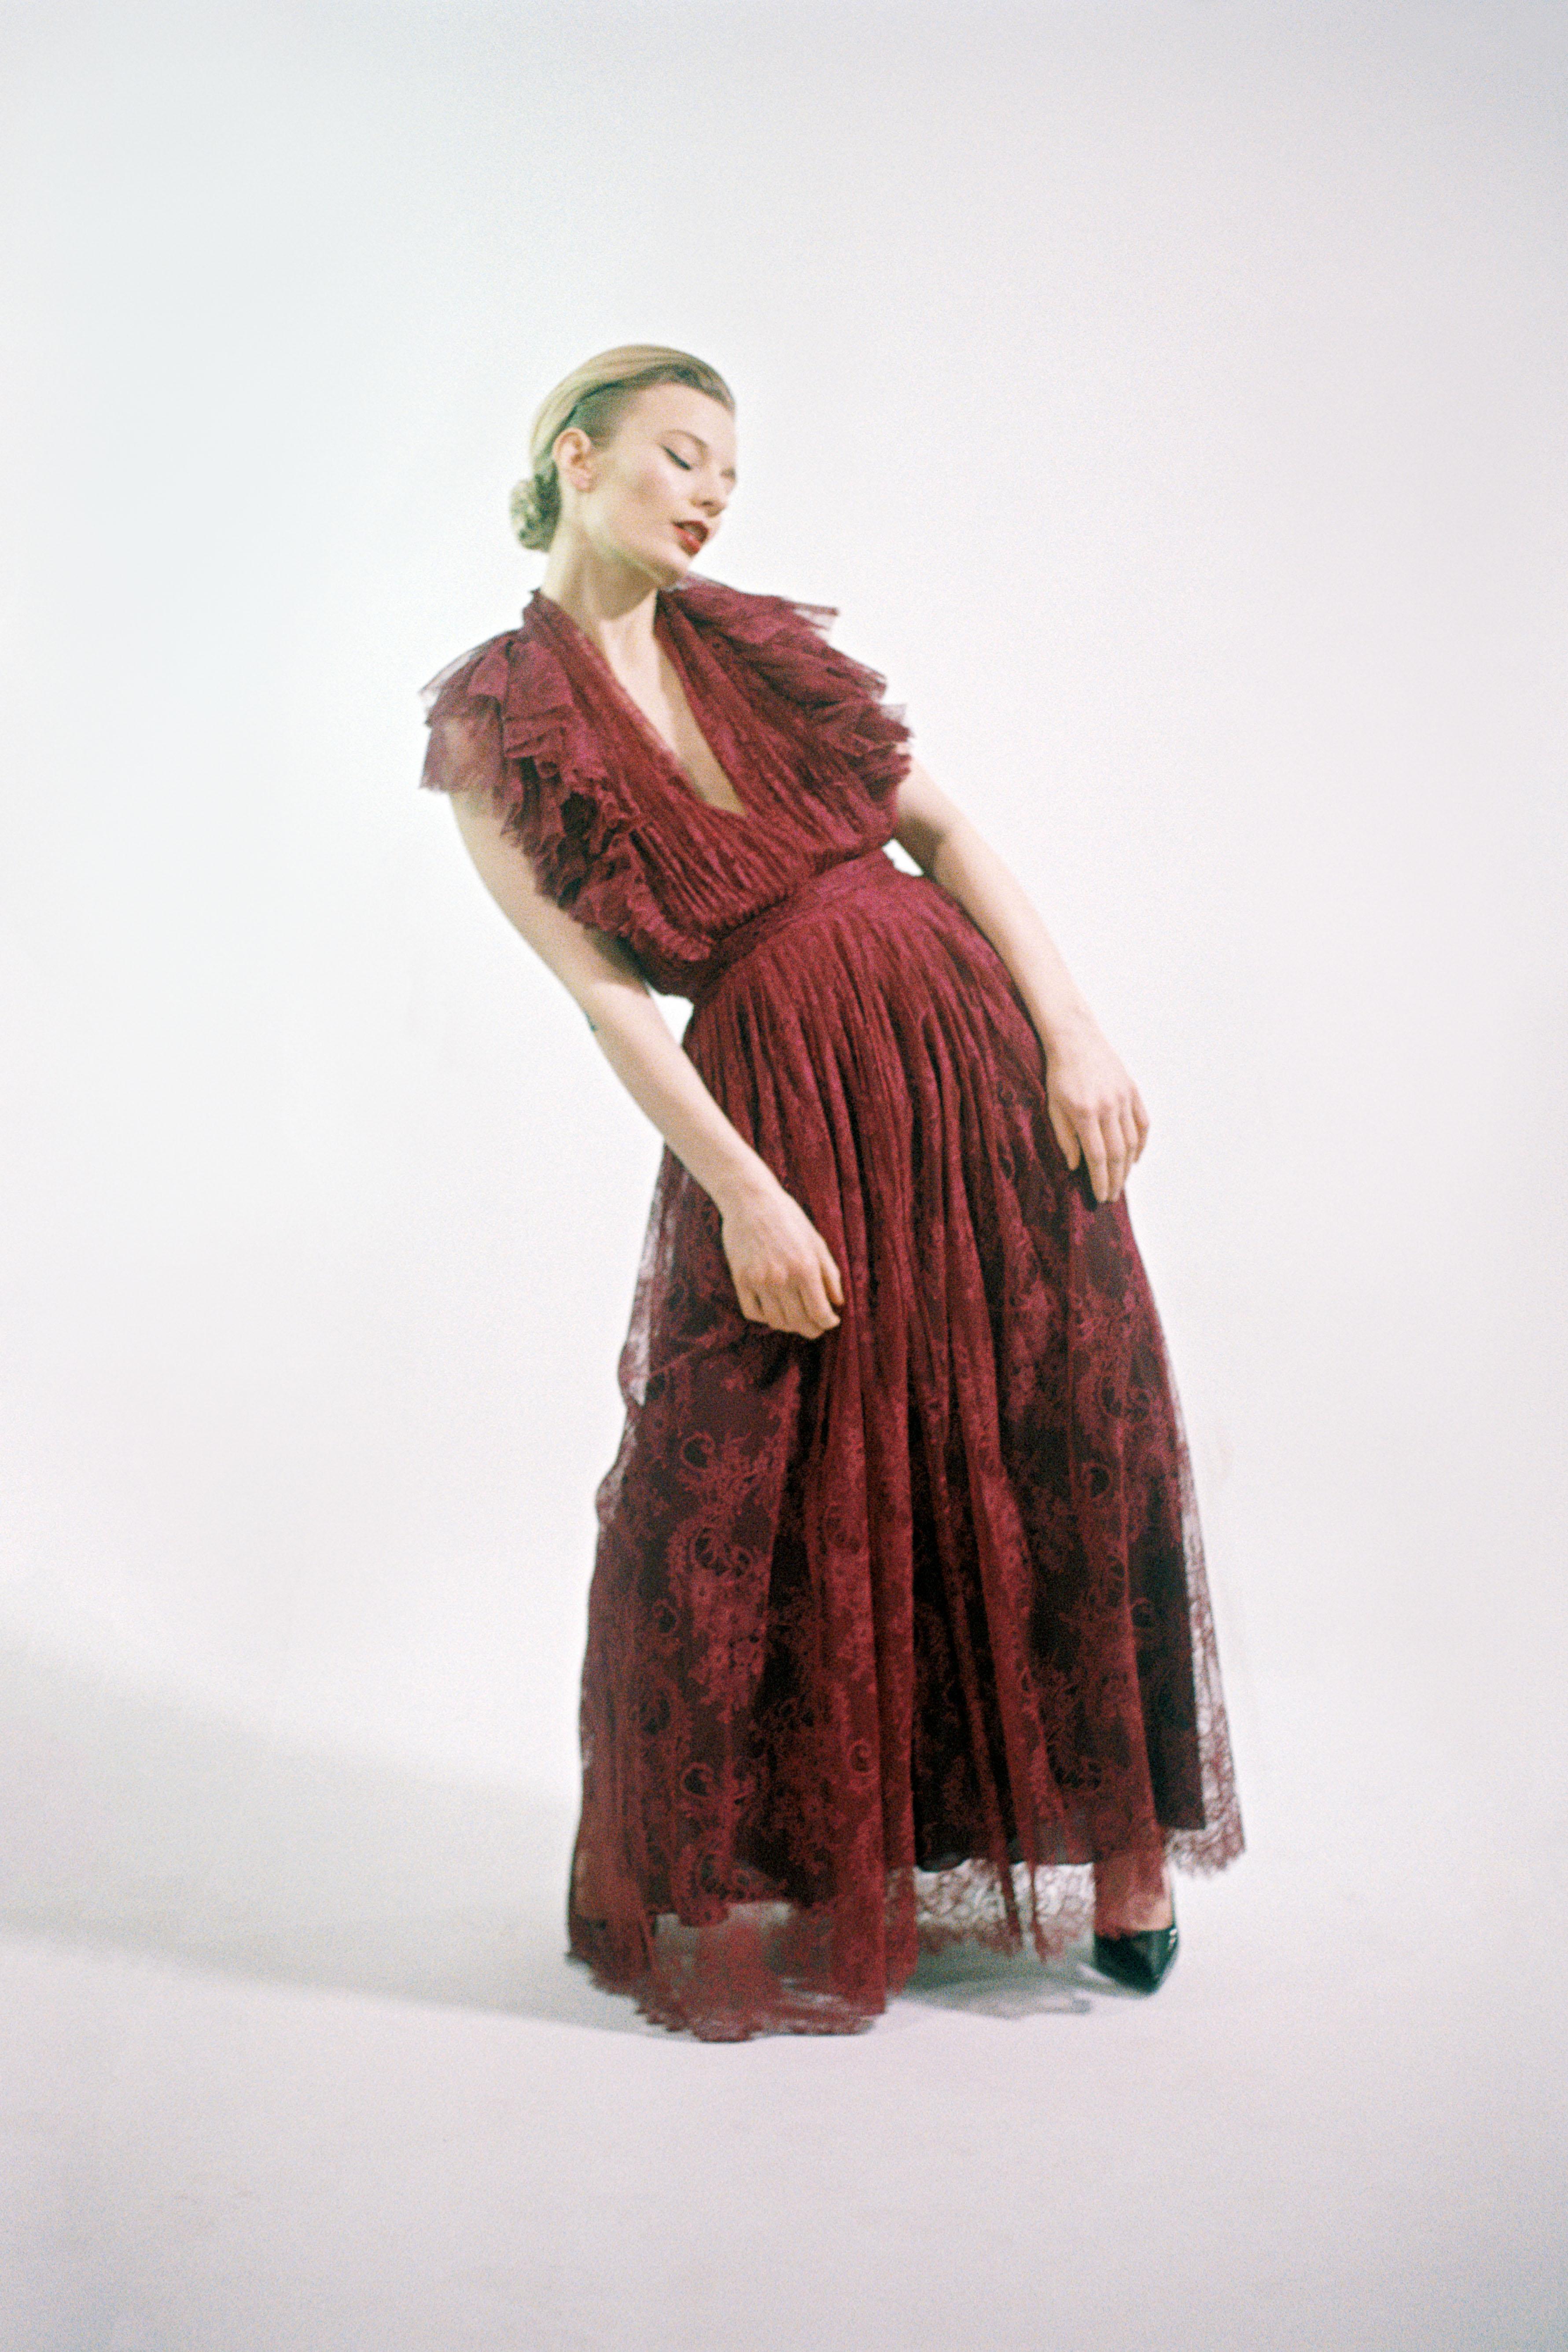 The most luxurious lace maxi dress by Italian designer Philosophy Di Lorenzo Serafini.

This layered plissé-lace maxi dress is a deep plum colour and has the most beautiful details. It features a halter-neck with layers of ruffled lace which closes